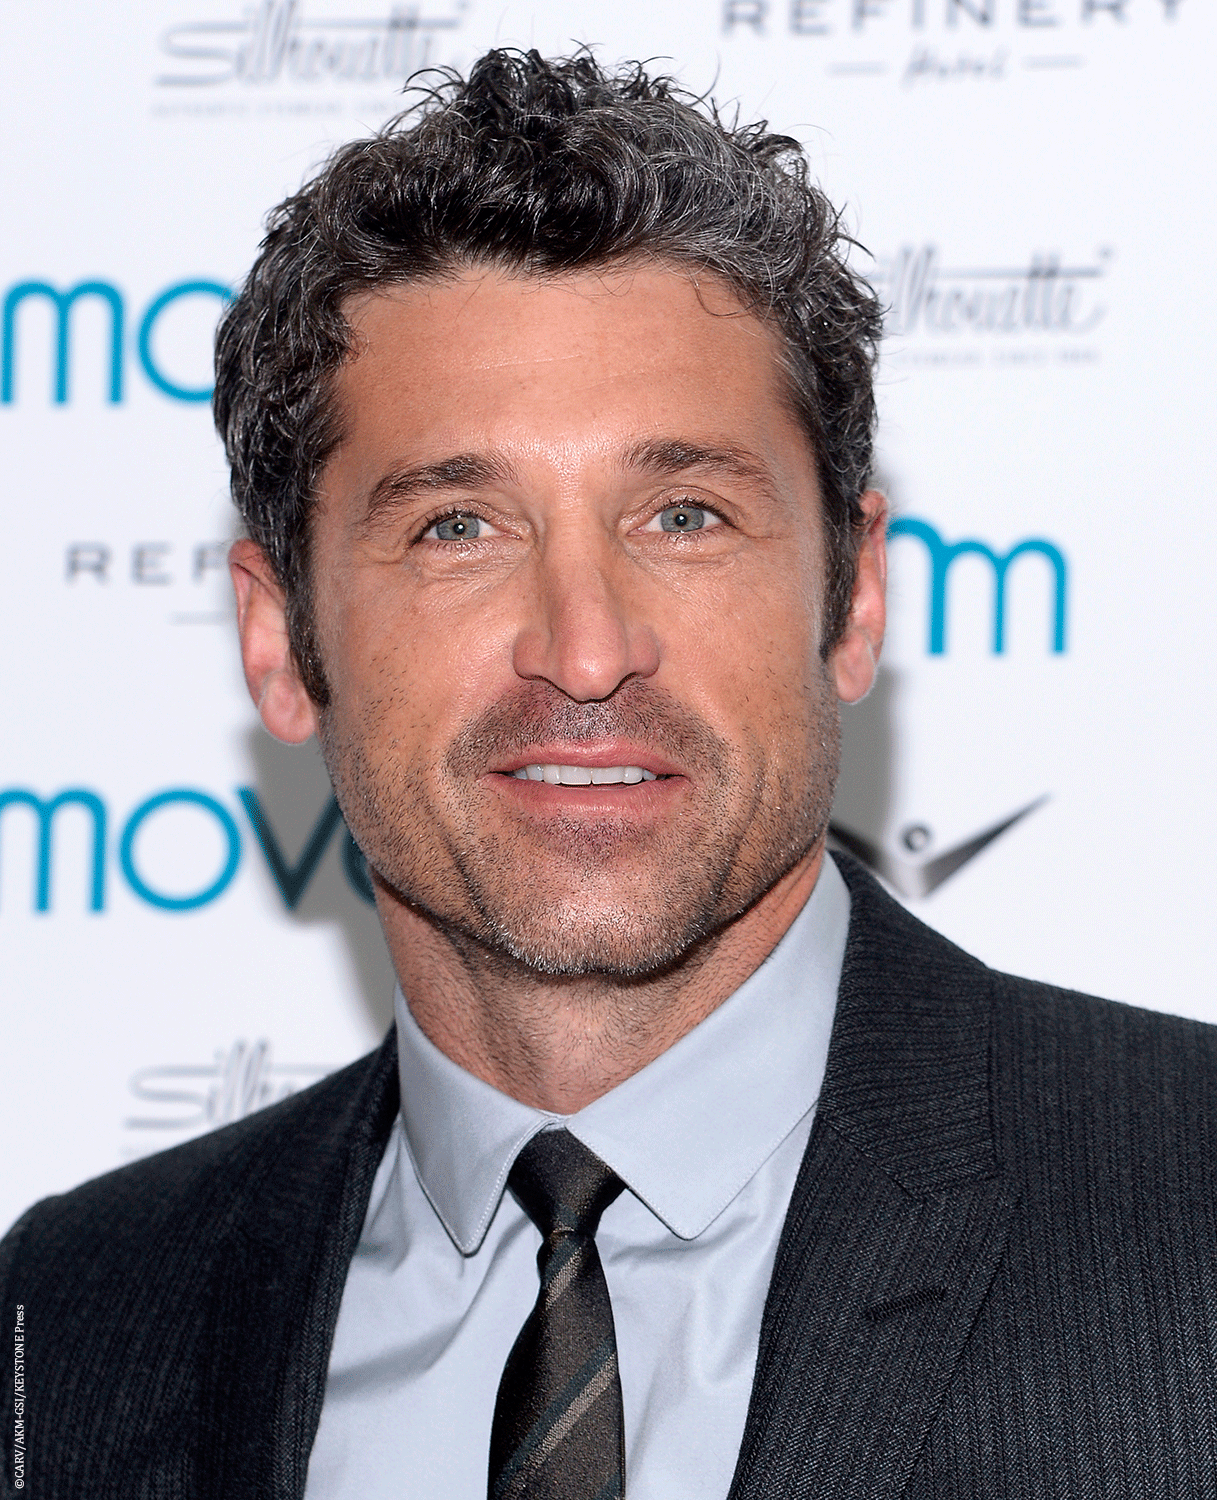 Patrick Dempsey and his co-star Ellen Pompeo raked in $350,000 an episode on Grey’s Anatomy. The popular doctor series first aired since 2005 and is now in its 11th season. Patrick and Ellen were with the show since the beginning, until Patrick exited the show in 2015.